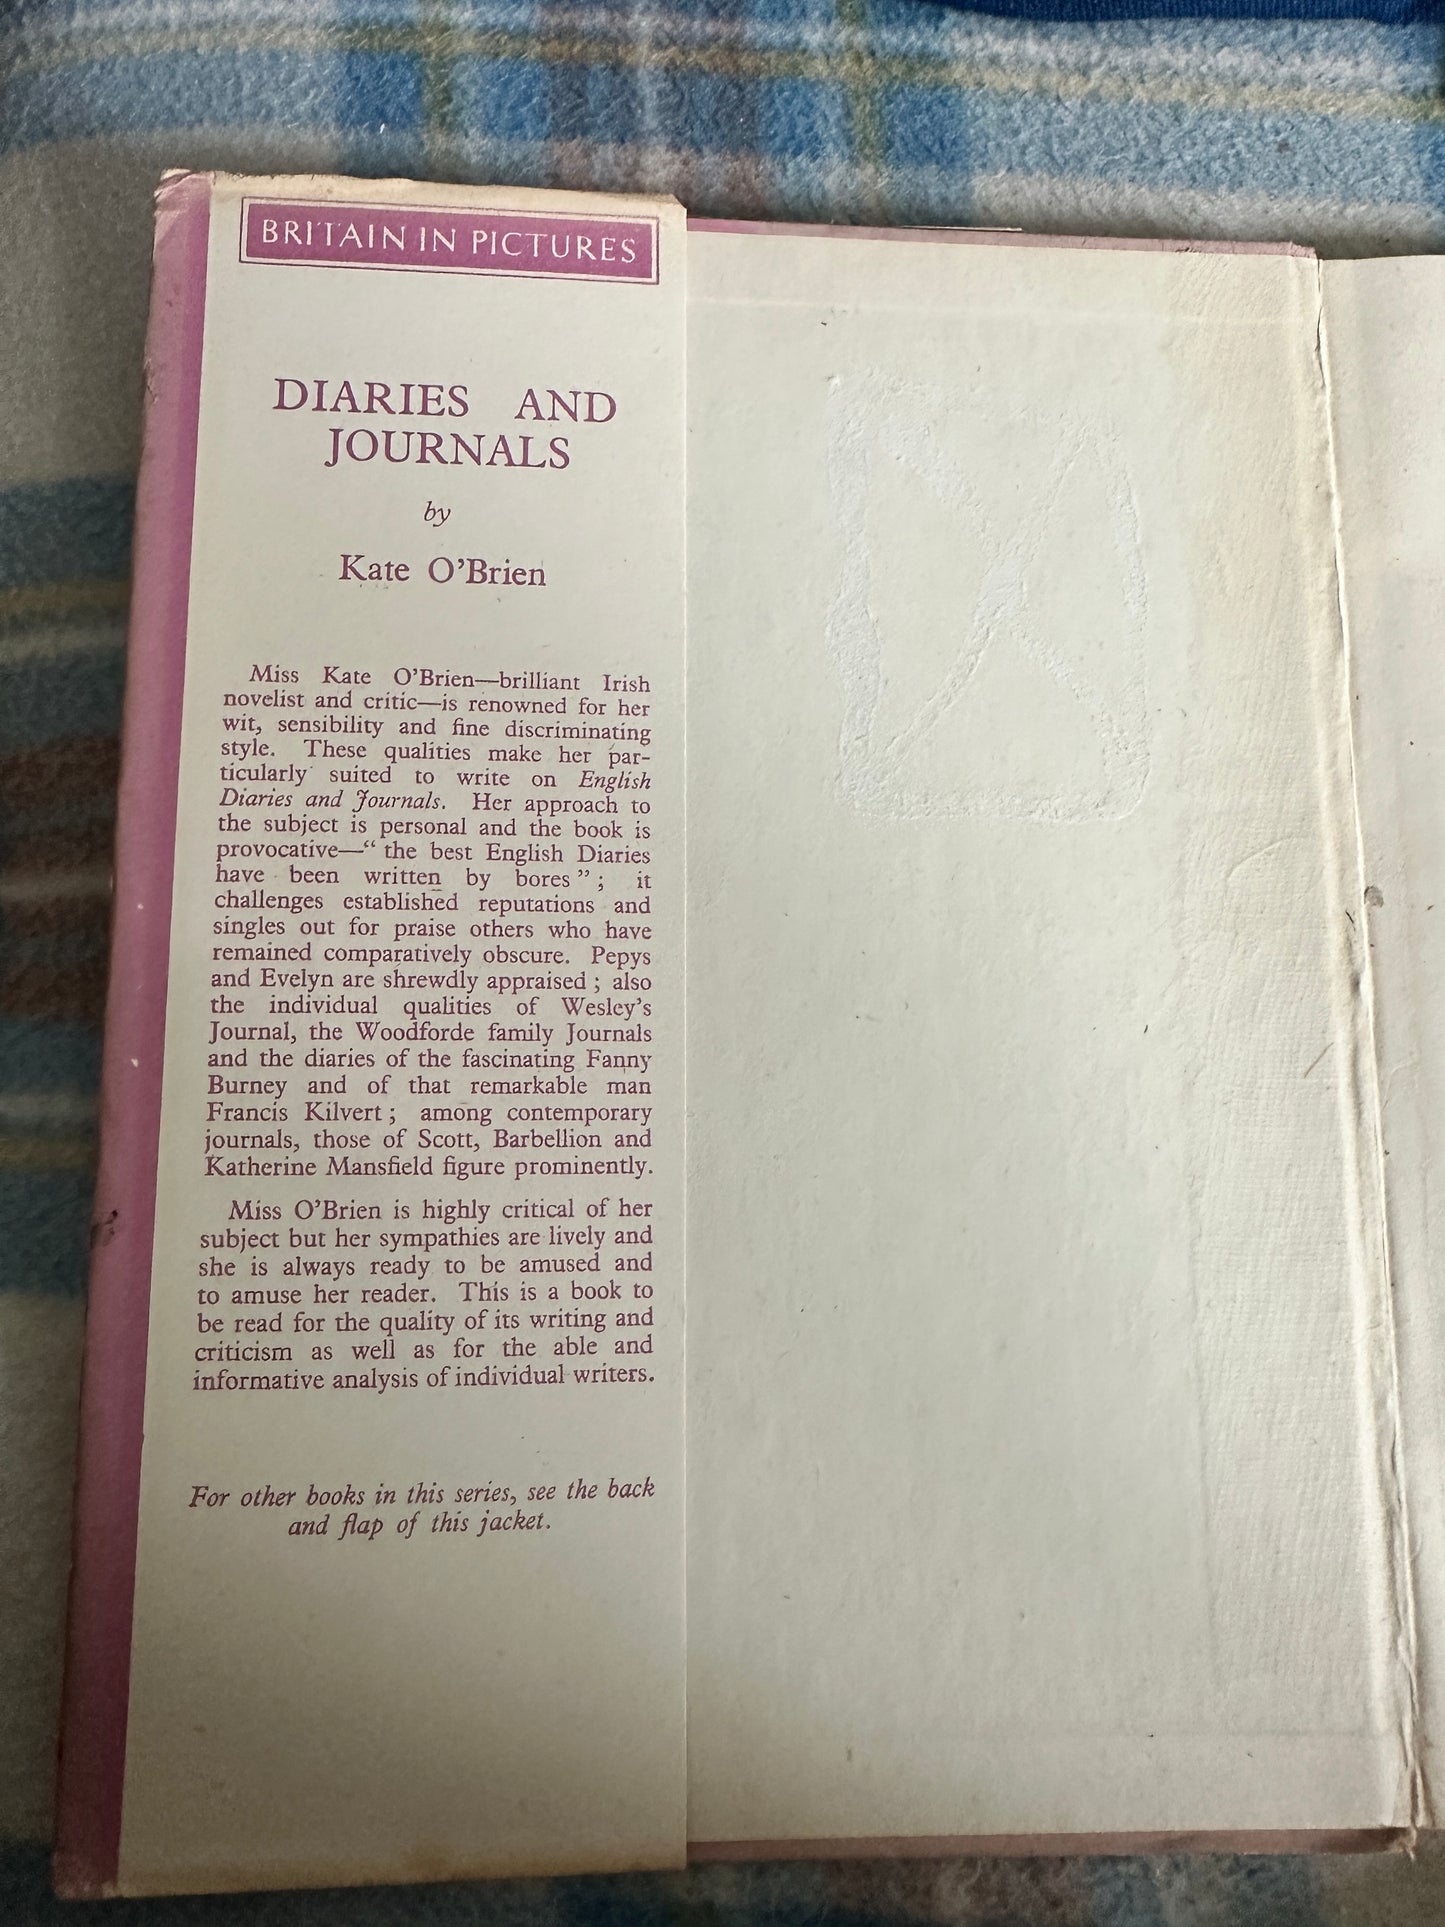 1943*1st* English Diaries & Journals - Kate O’Brien(Collins)